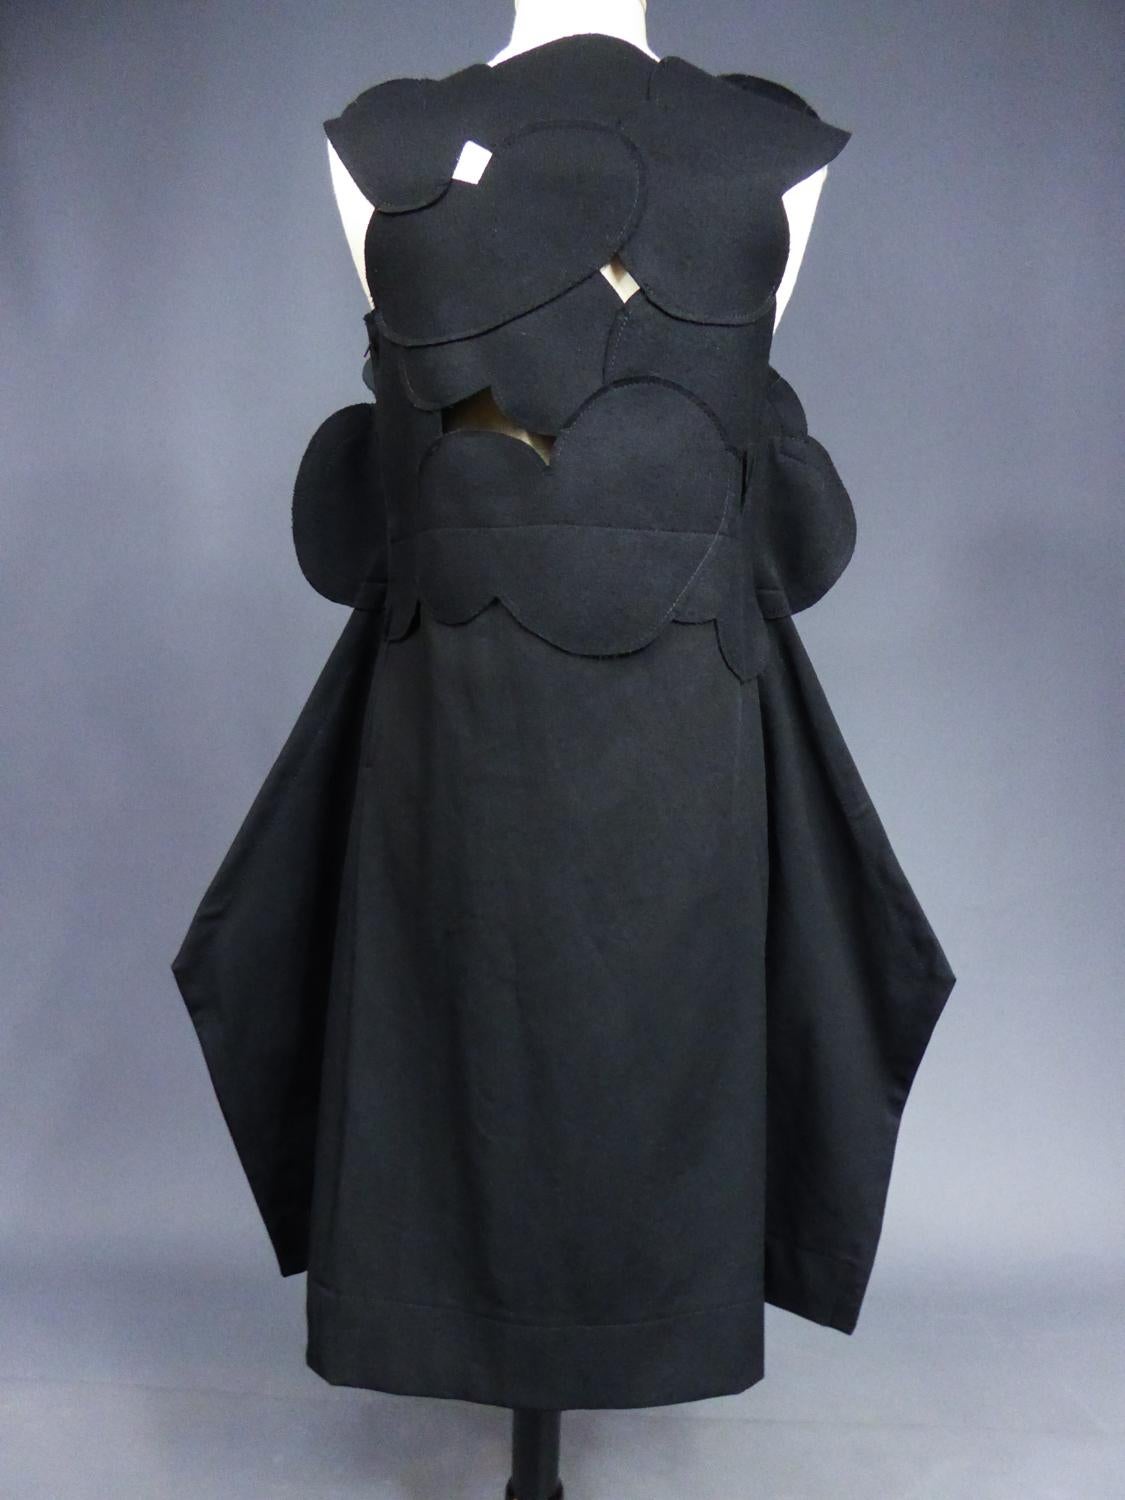 A Comme des Garcons Junya Watanabe Black Woollen Chasuble Dress Circa 2000 For Sale 7